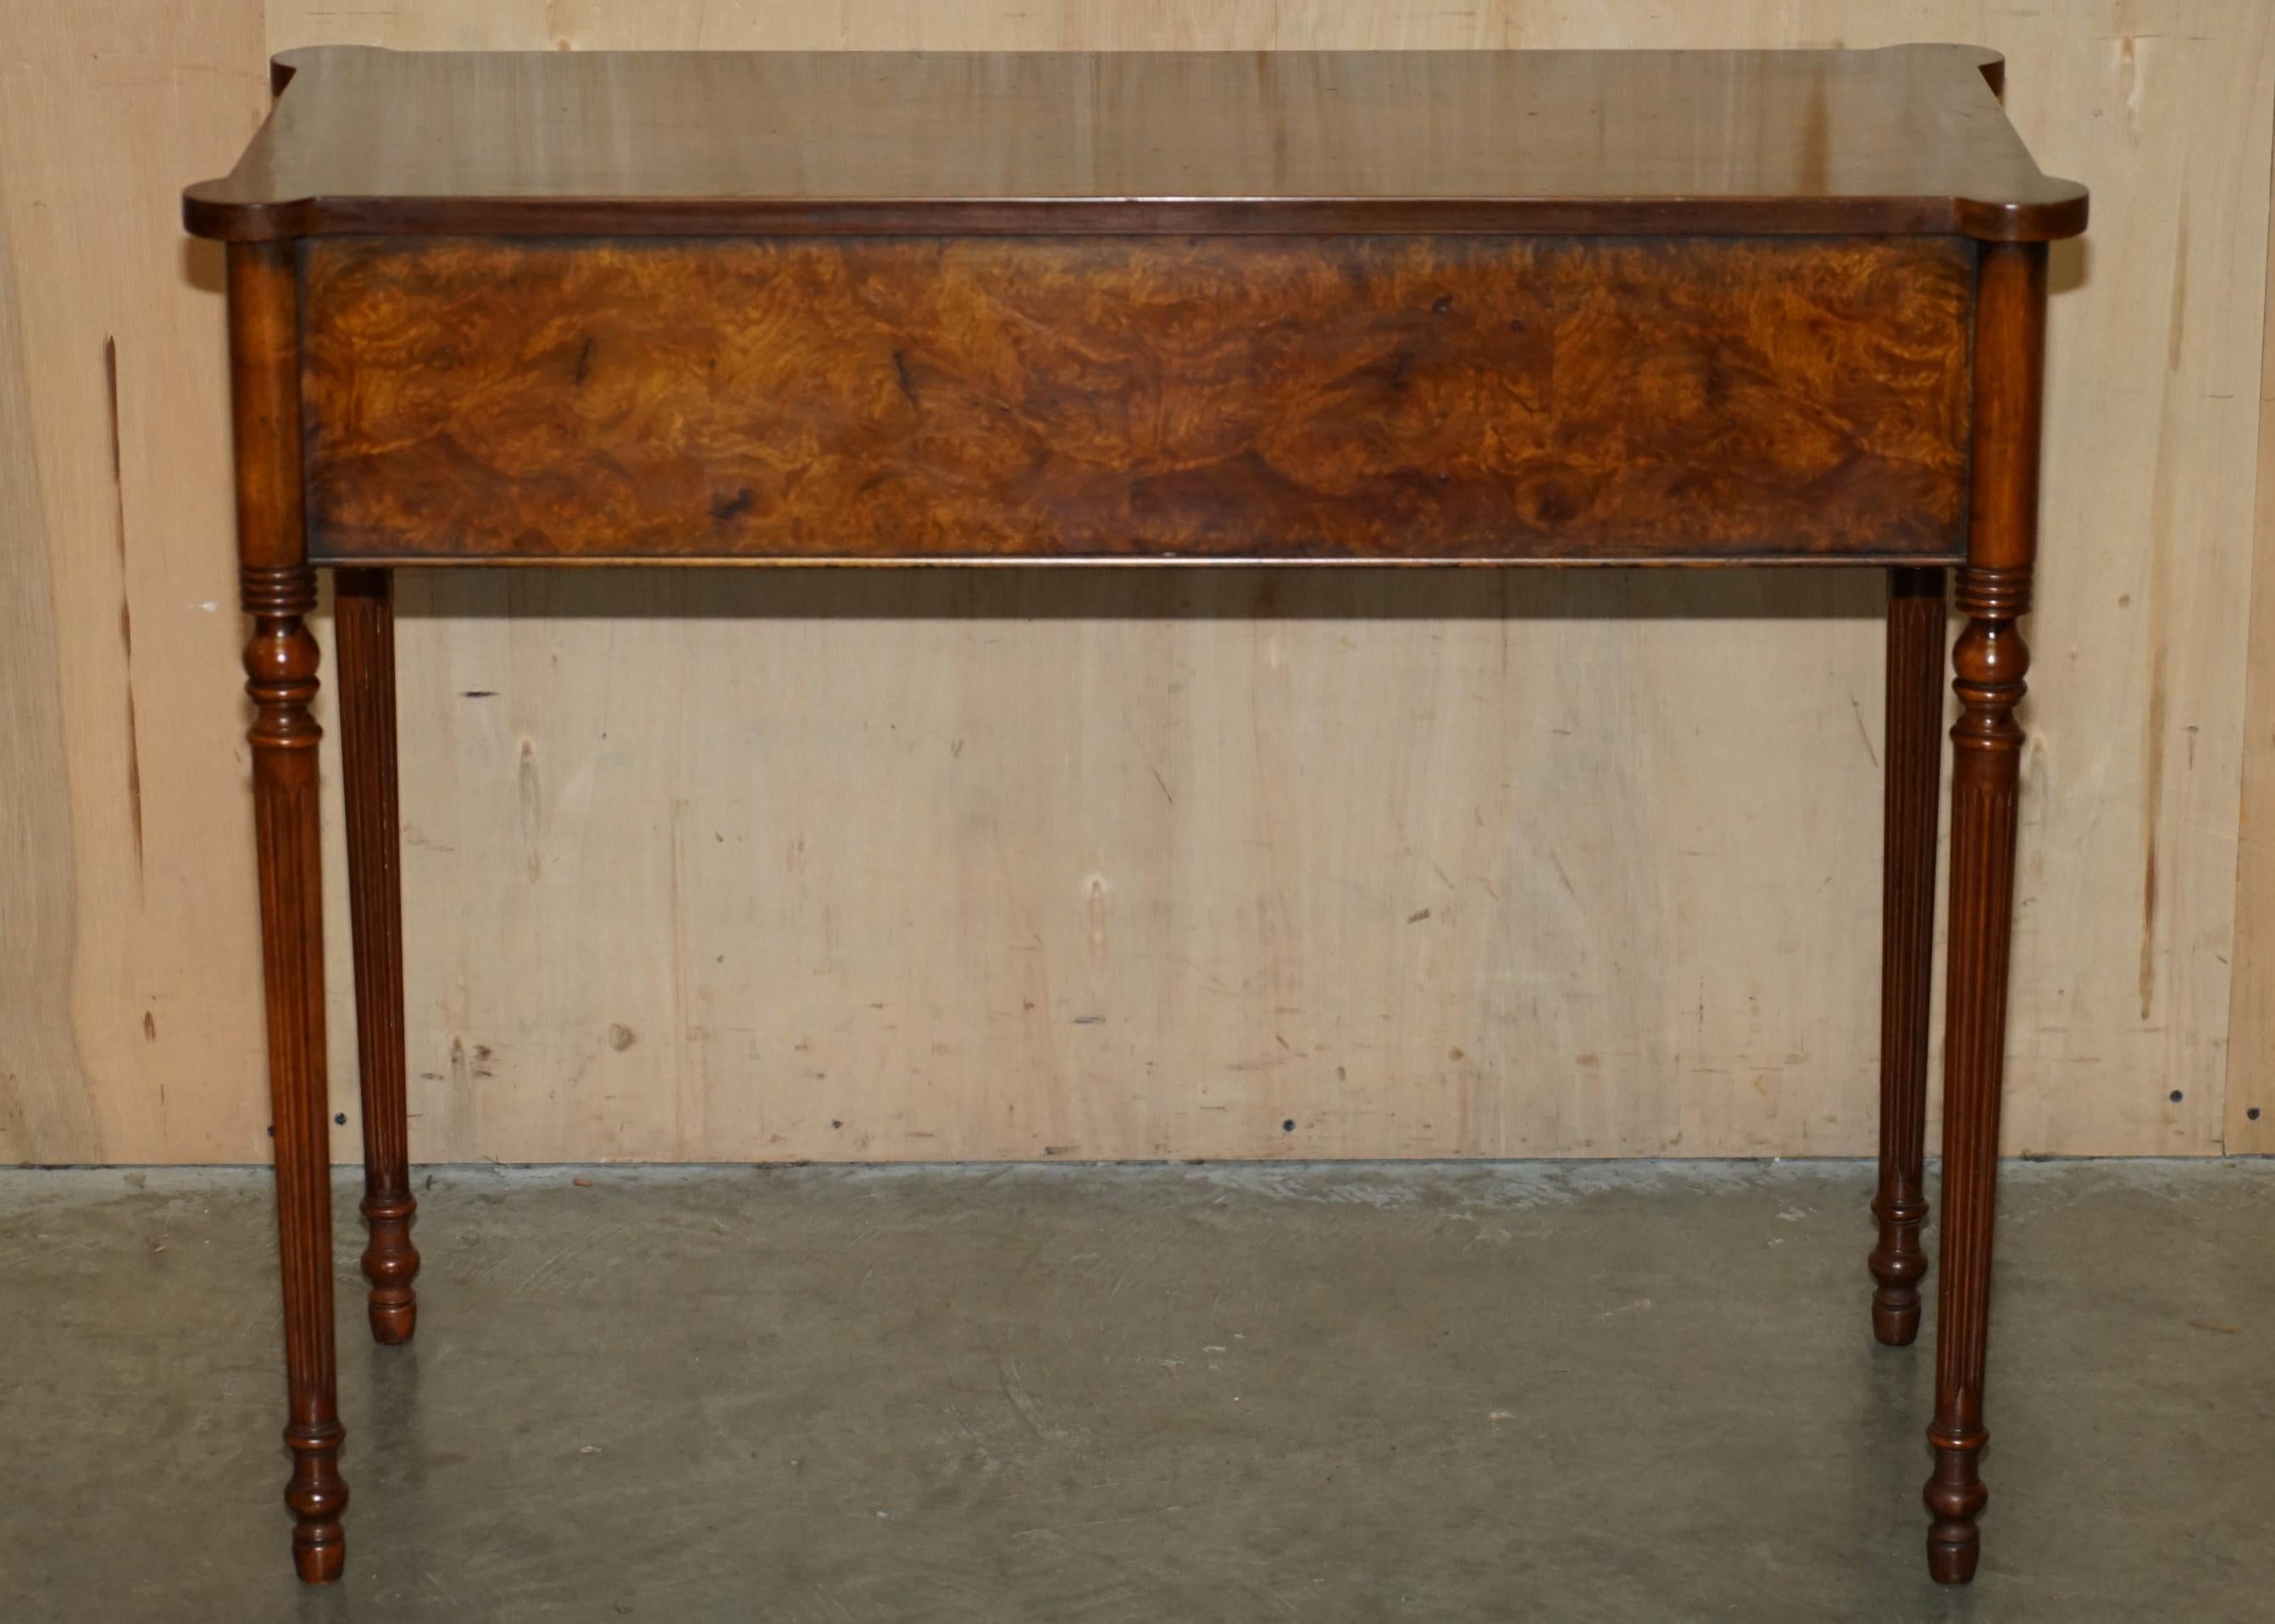 EXQUISITE CIRCA 1920 BURR ELM & SATiNWOOD FRENCH POLISHED RESTORED CONSOLE TABLE For Sale 8